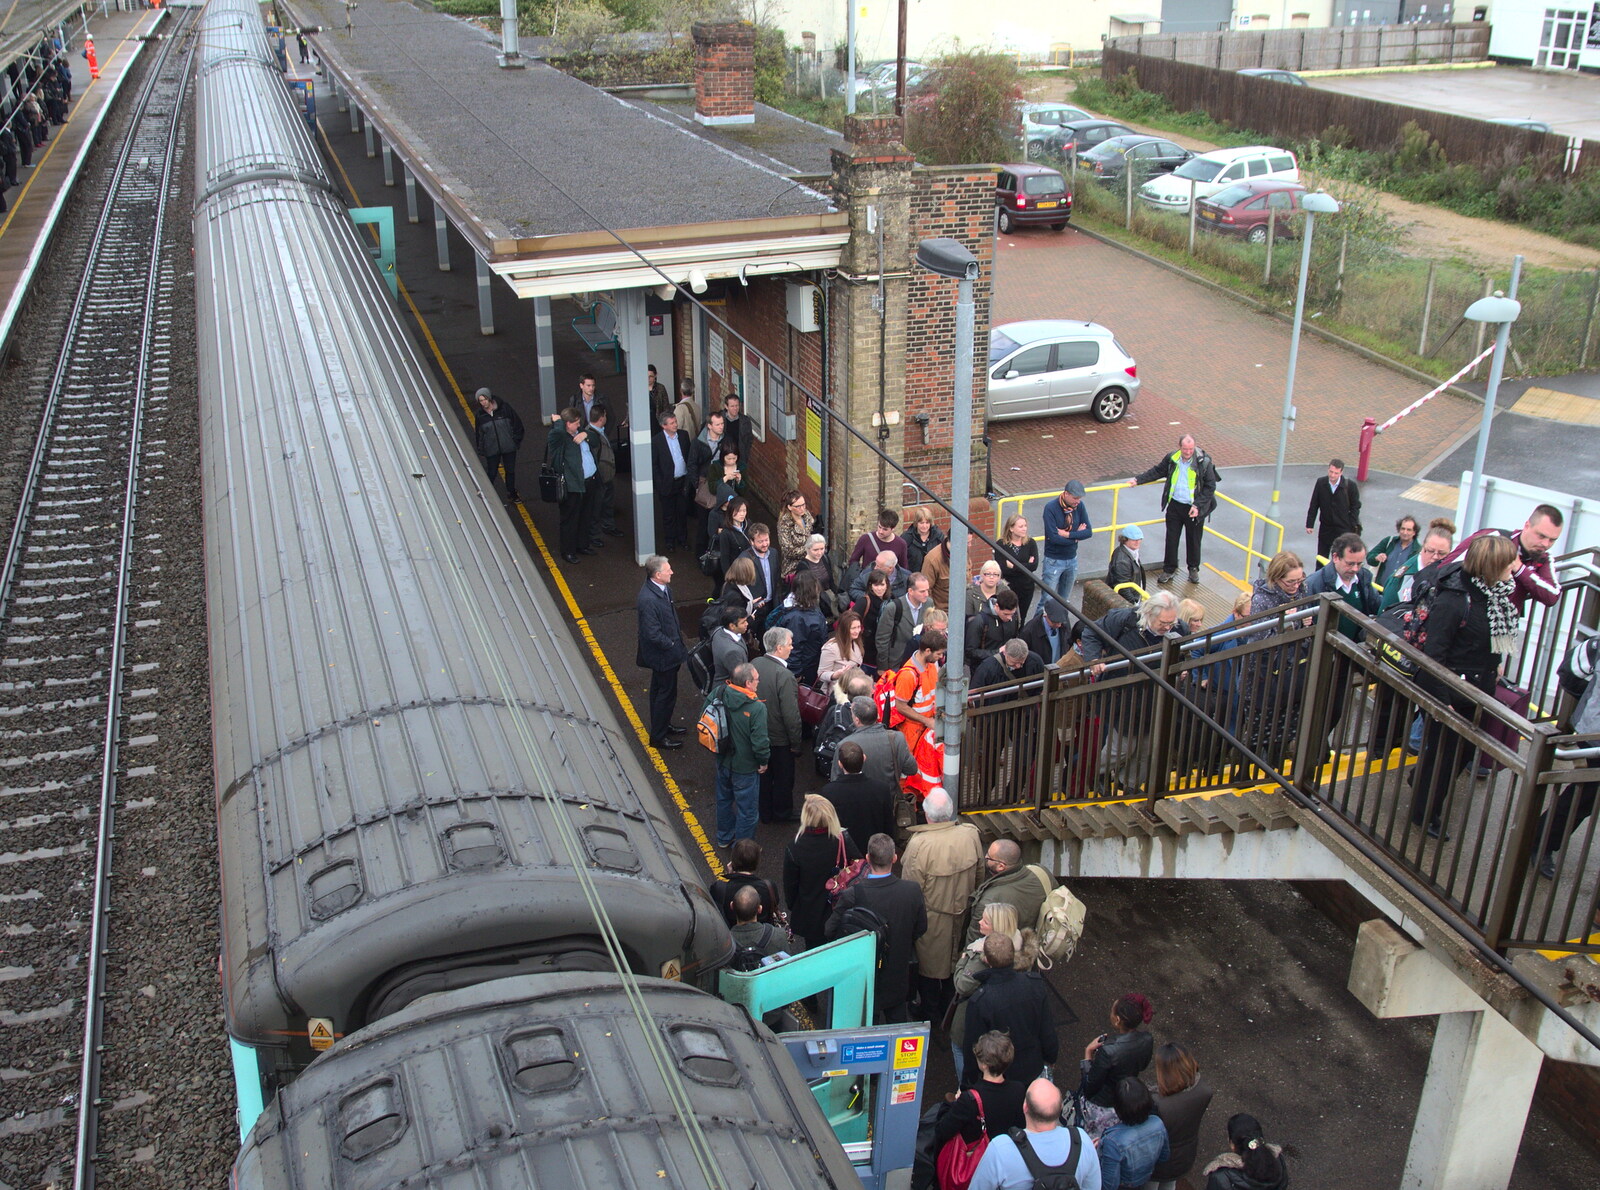 Hundreds of people pile over the bridge from (Very) Long Train (Not) Running, Stowmarket, Suffolk - 21st October 2014